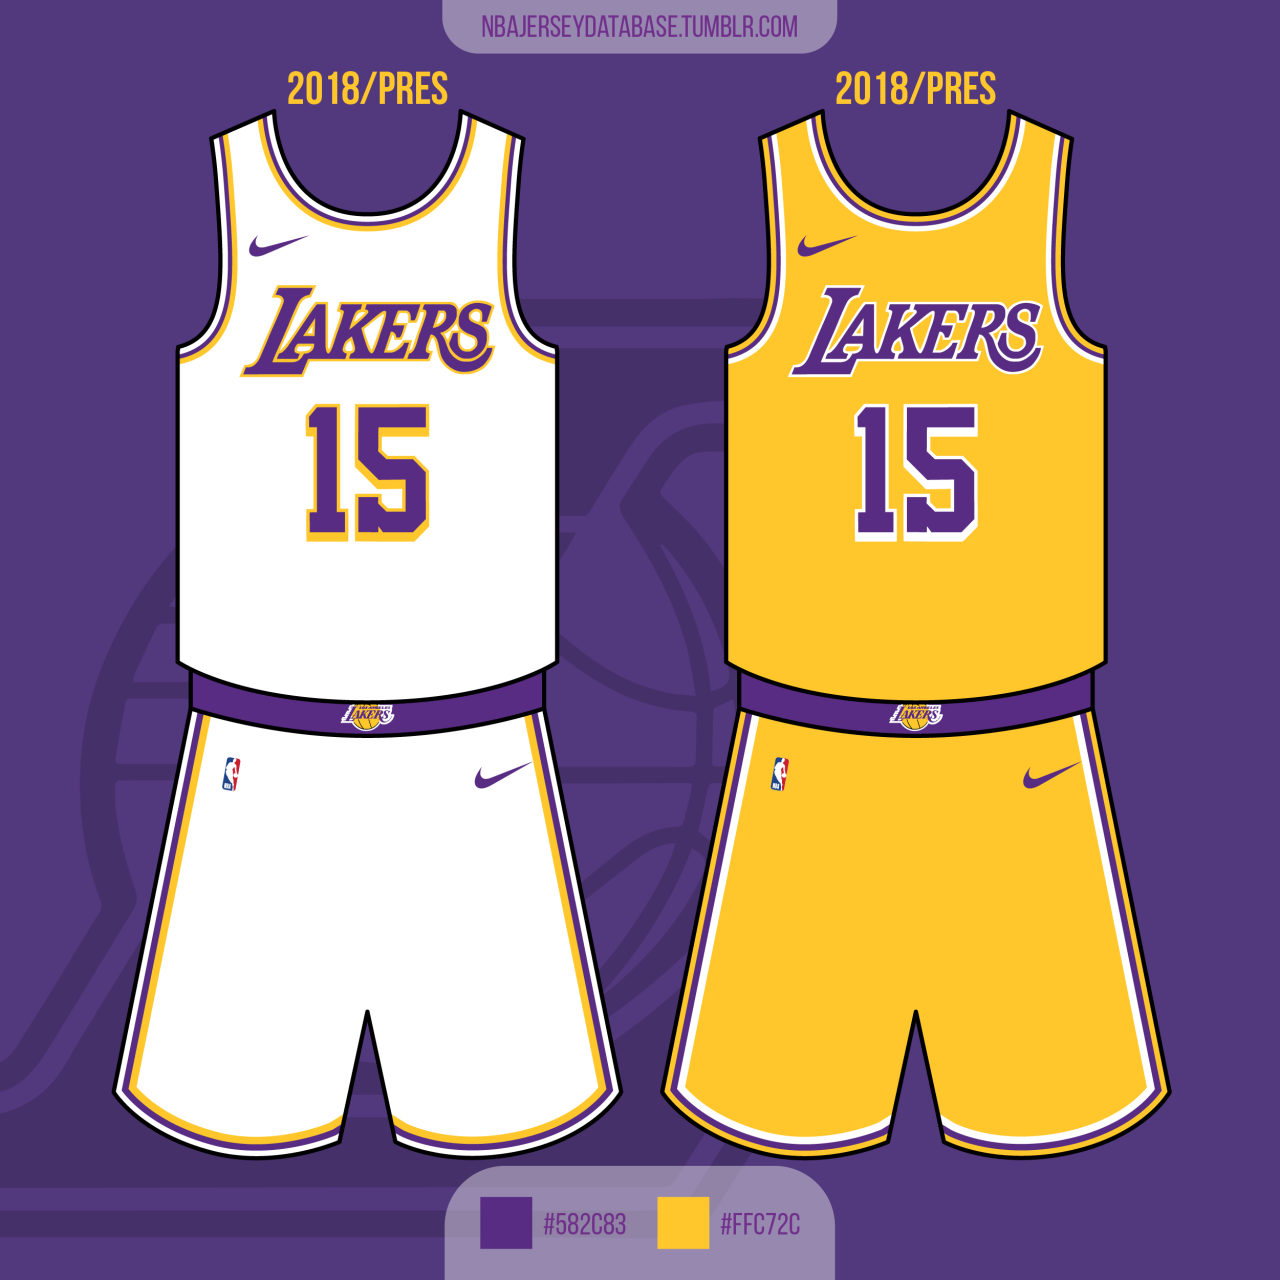 NBA Jersey Database, Los Angeles Lakers 2018-Pres